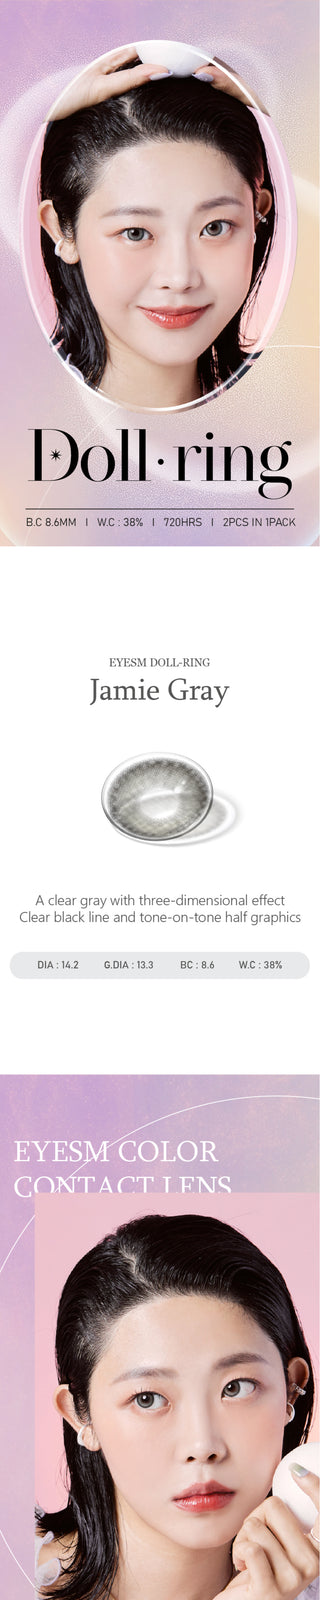 Several views of a Korean model with the Eyesm Dollring Jamie Grey color contact lenses. An enlargement of a model's eyes with the prescription colored contacts, demonstrating the subtle yet striking change on dark eyes.